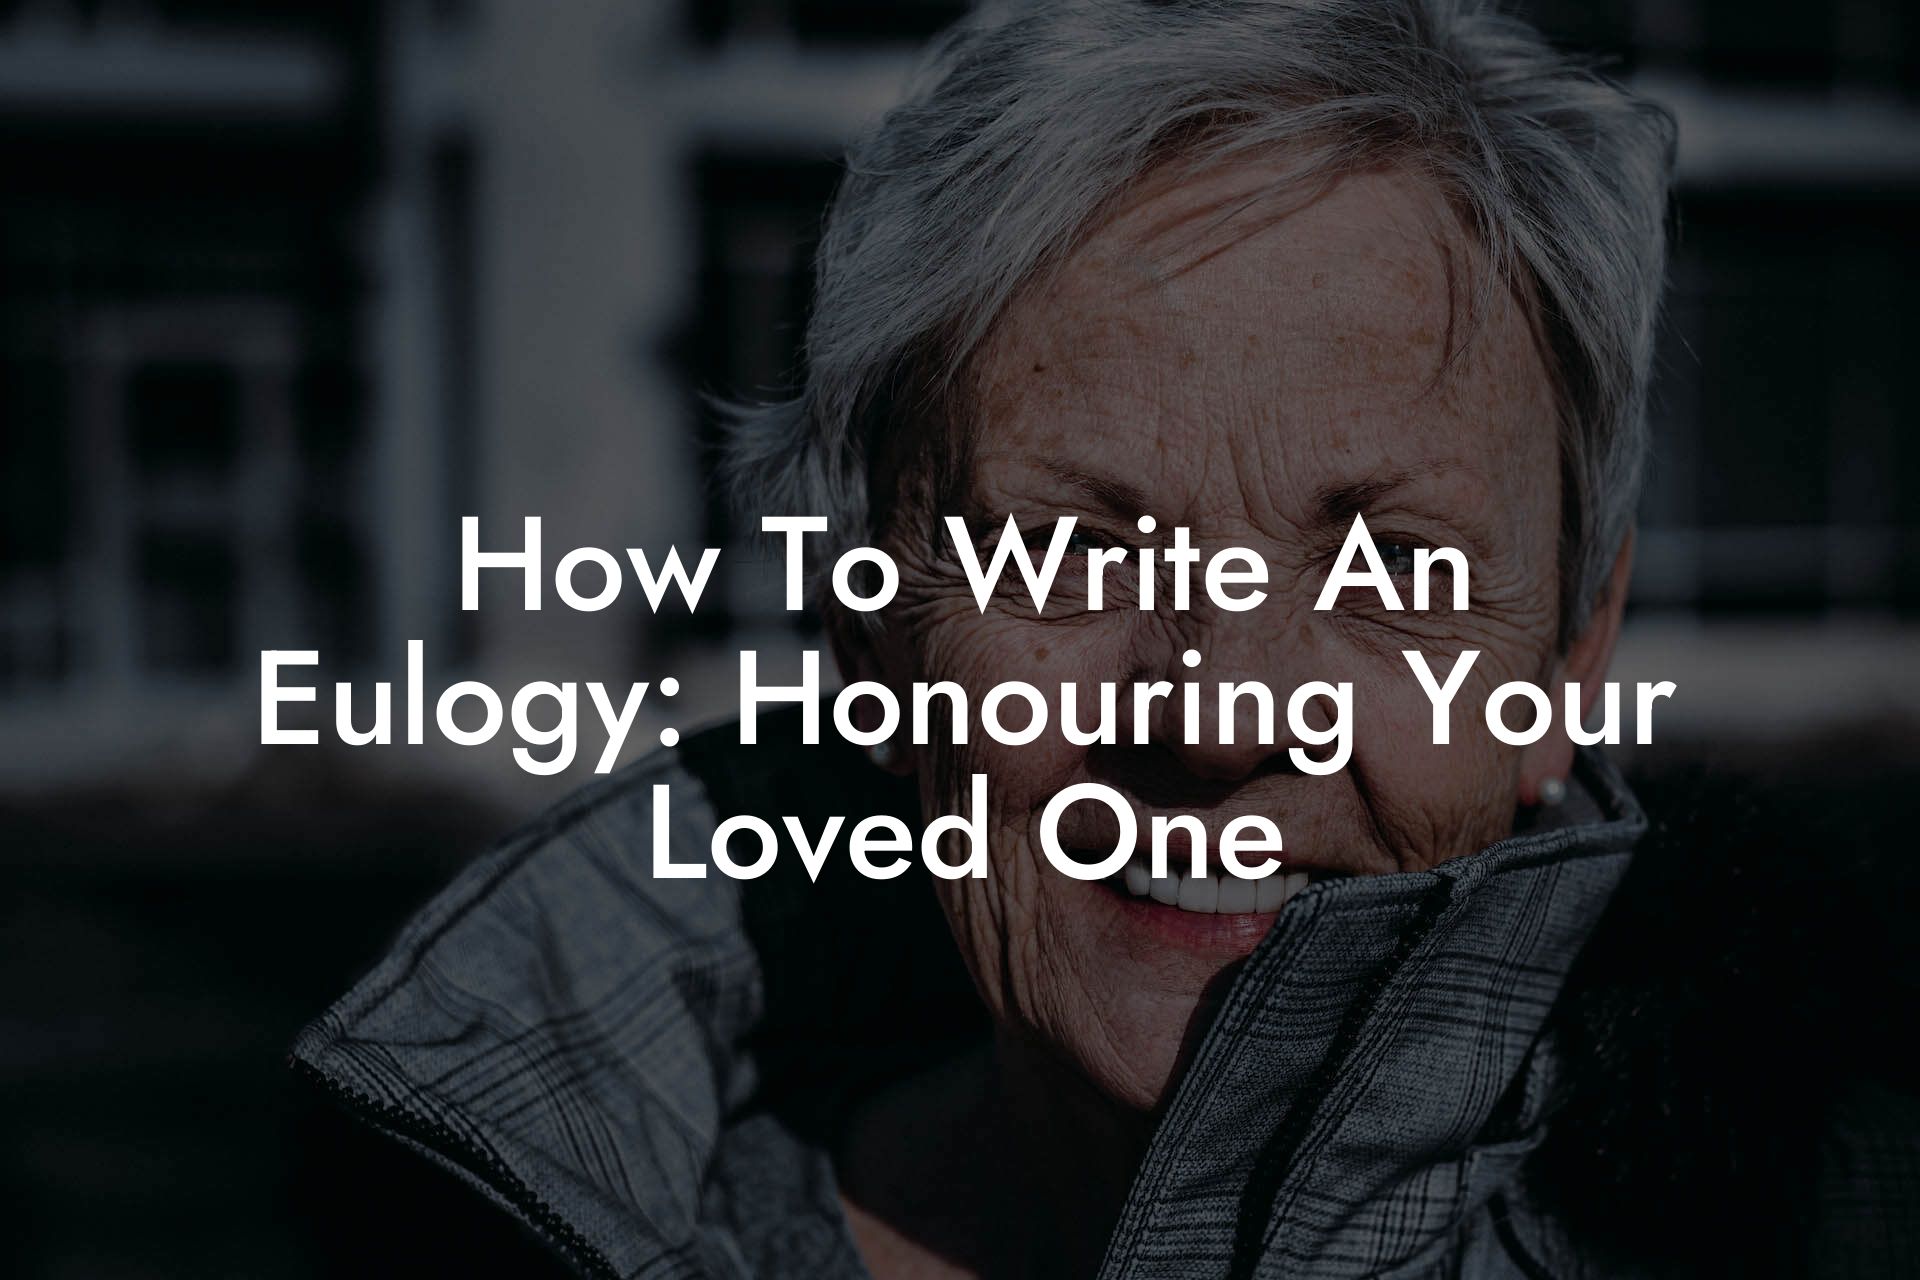 How To Write An Eulogy: Honouring Your Loved One